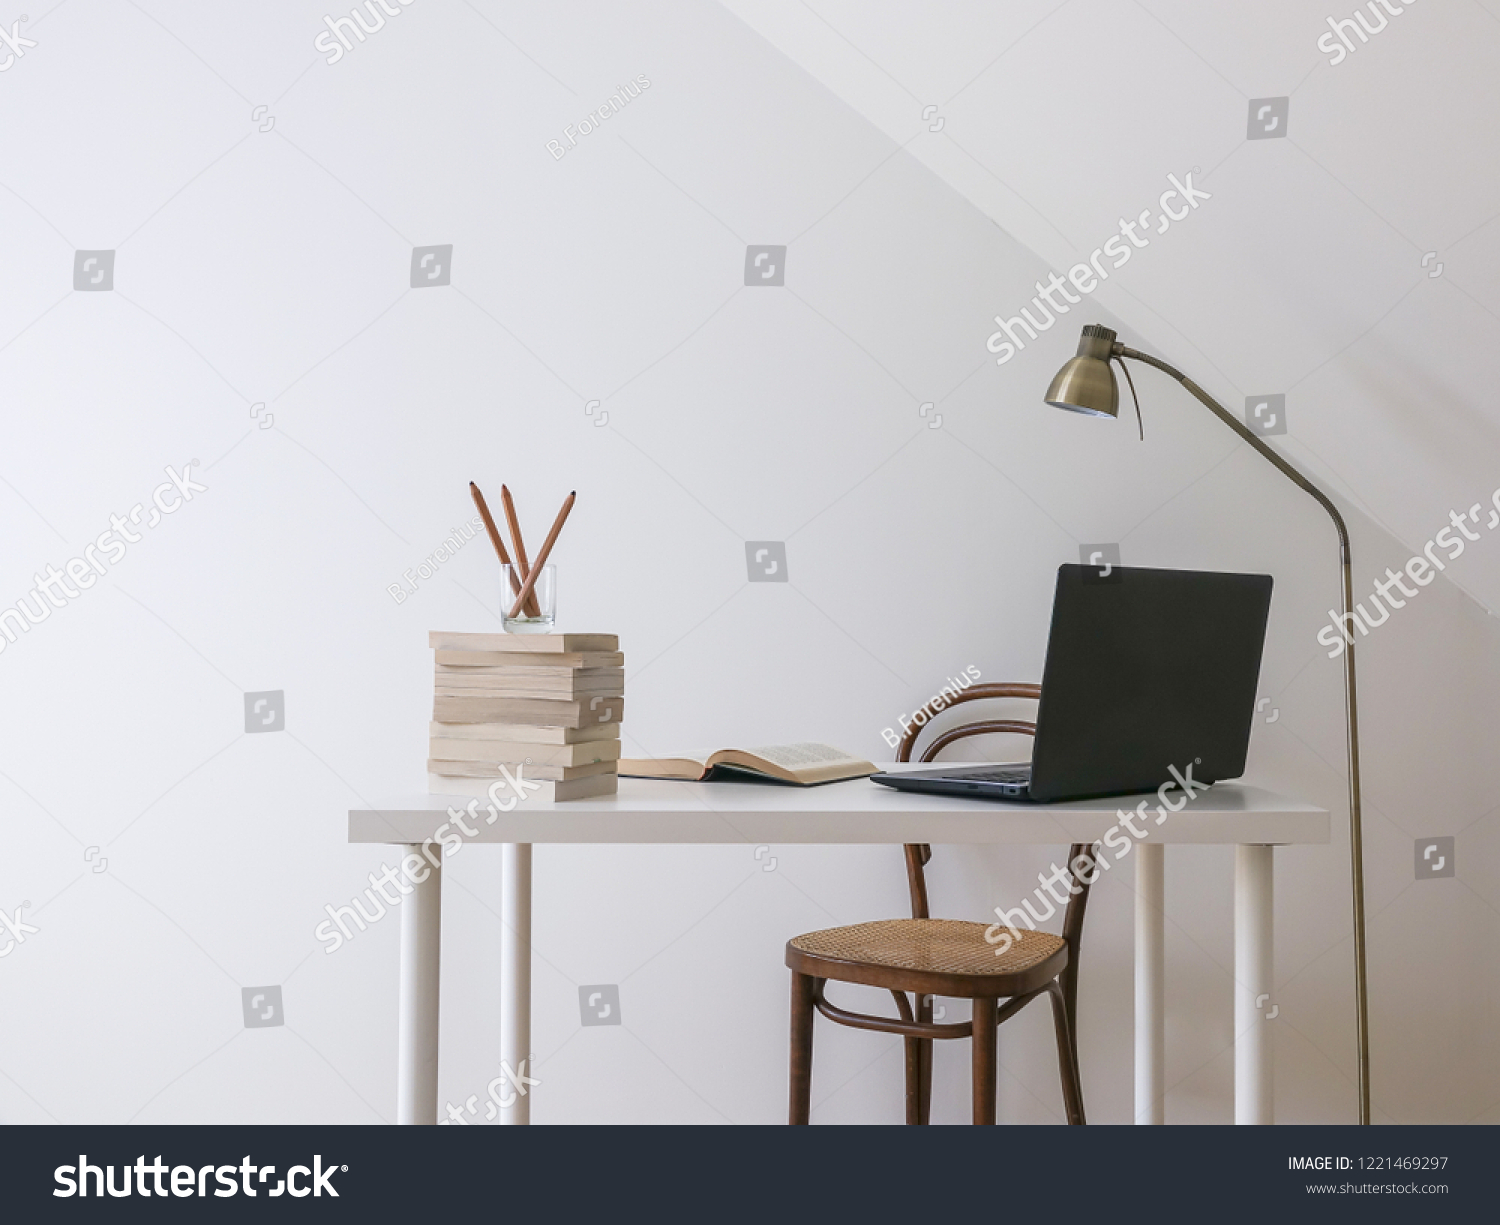 Simple workspace interior. Laptop computer, open book and a pile of books on a white modern desk. Empty white wall for copy space. #1221469297